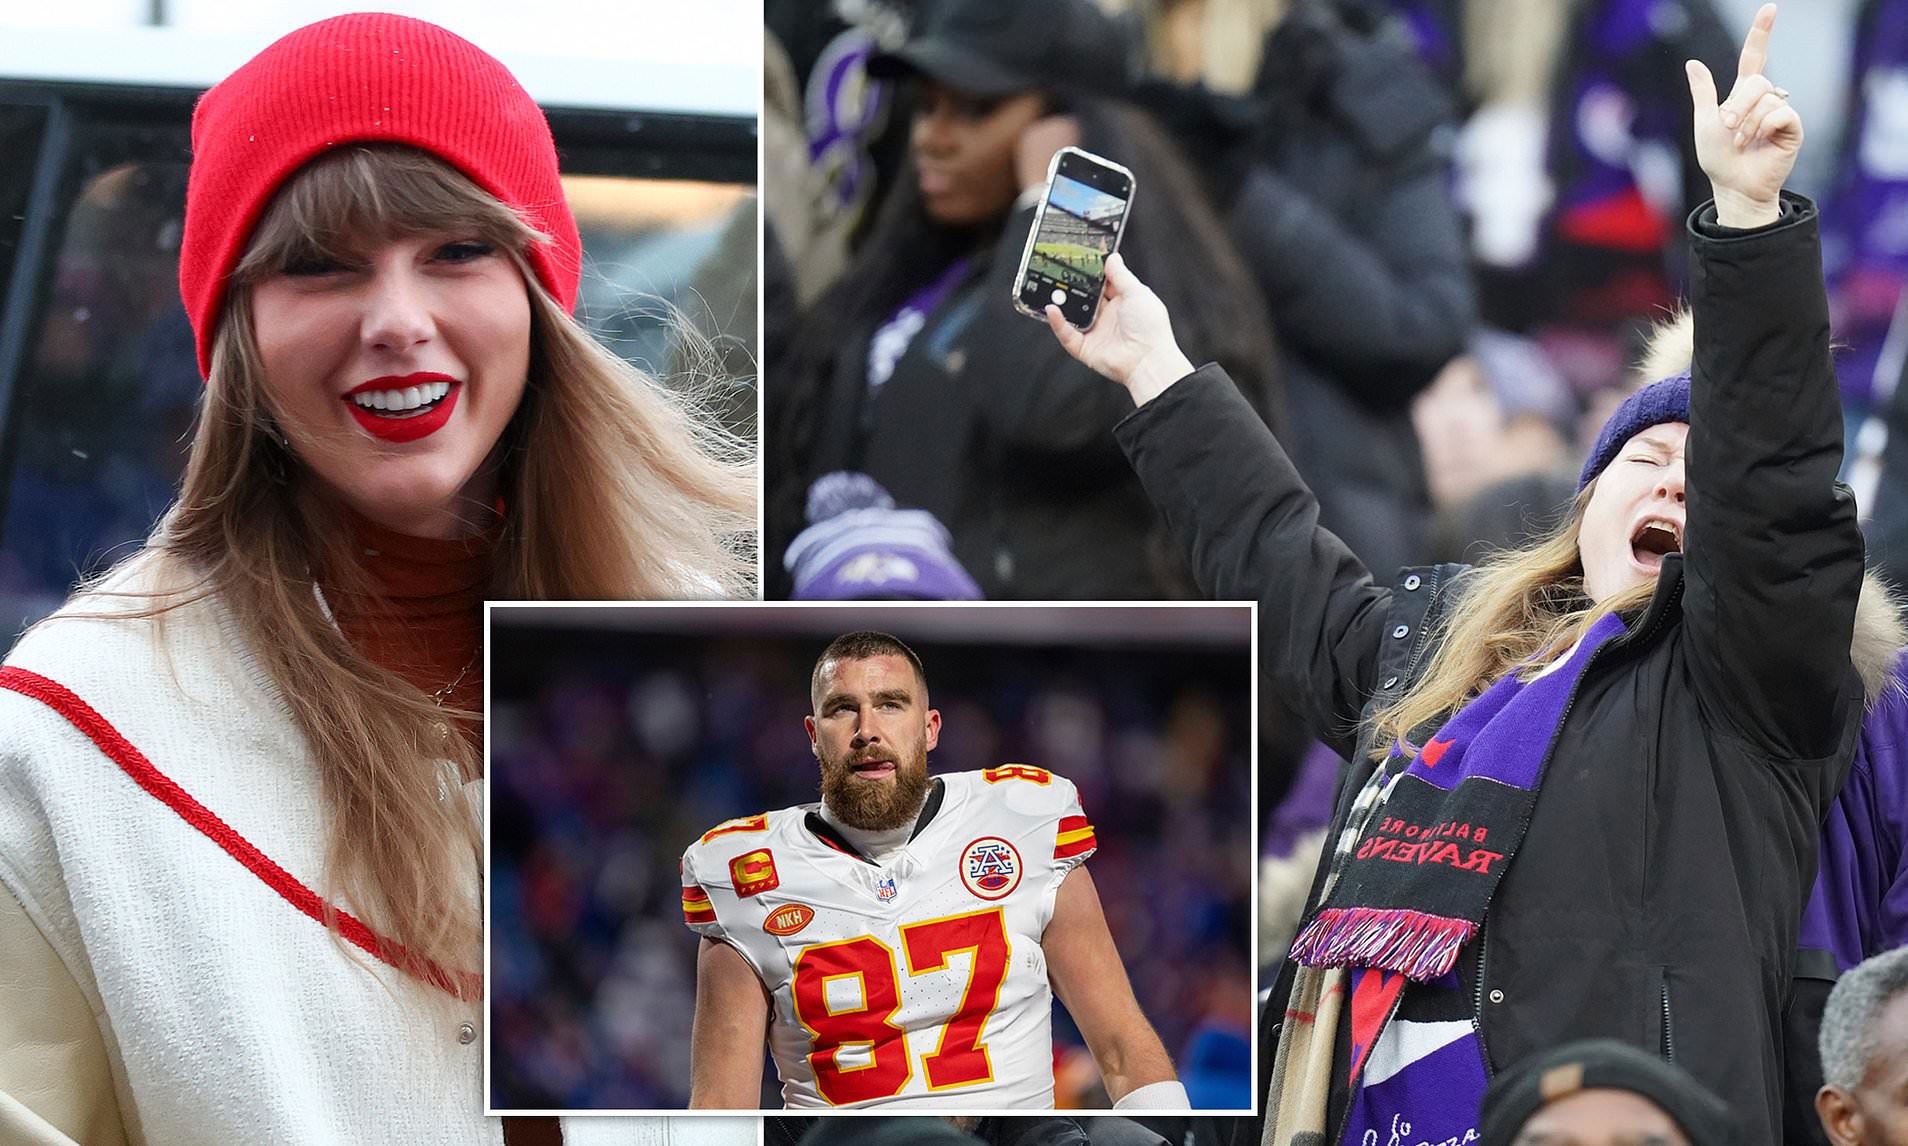 Ravens fans hope to see Taylor Swift at the AFC Championship game